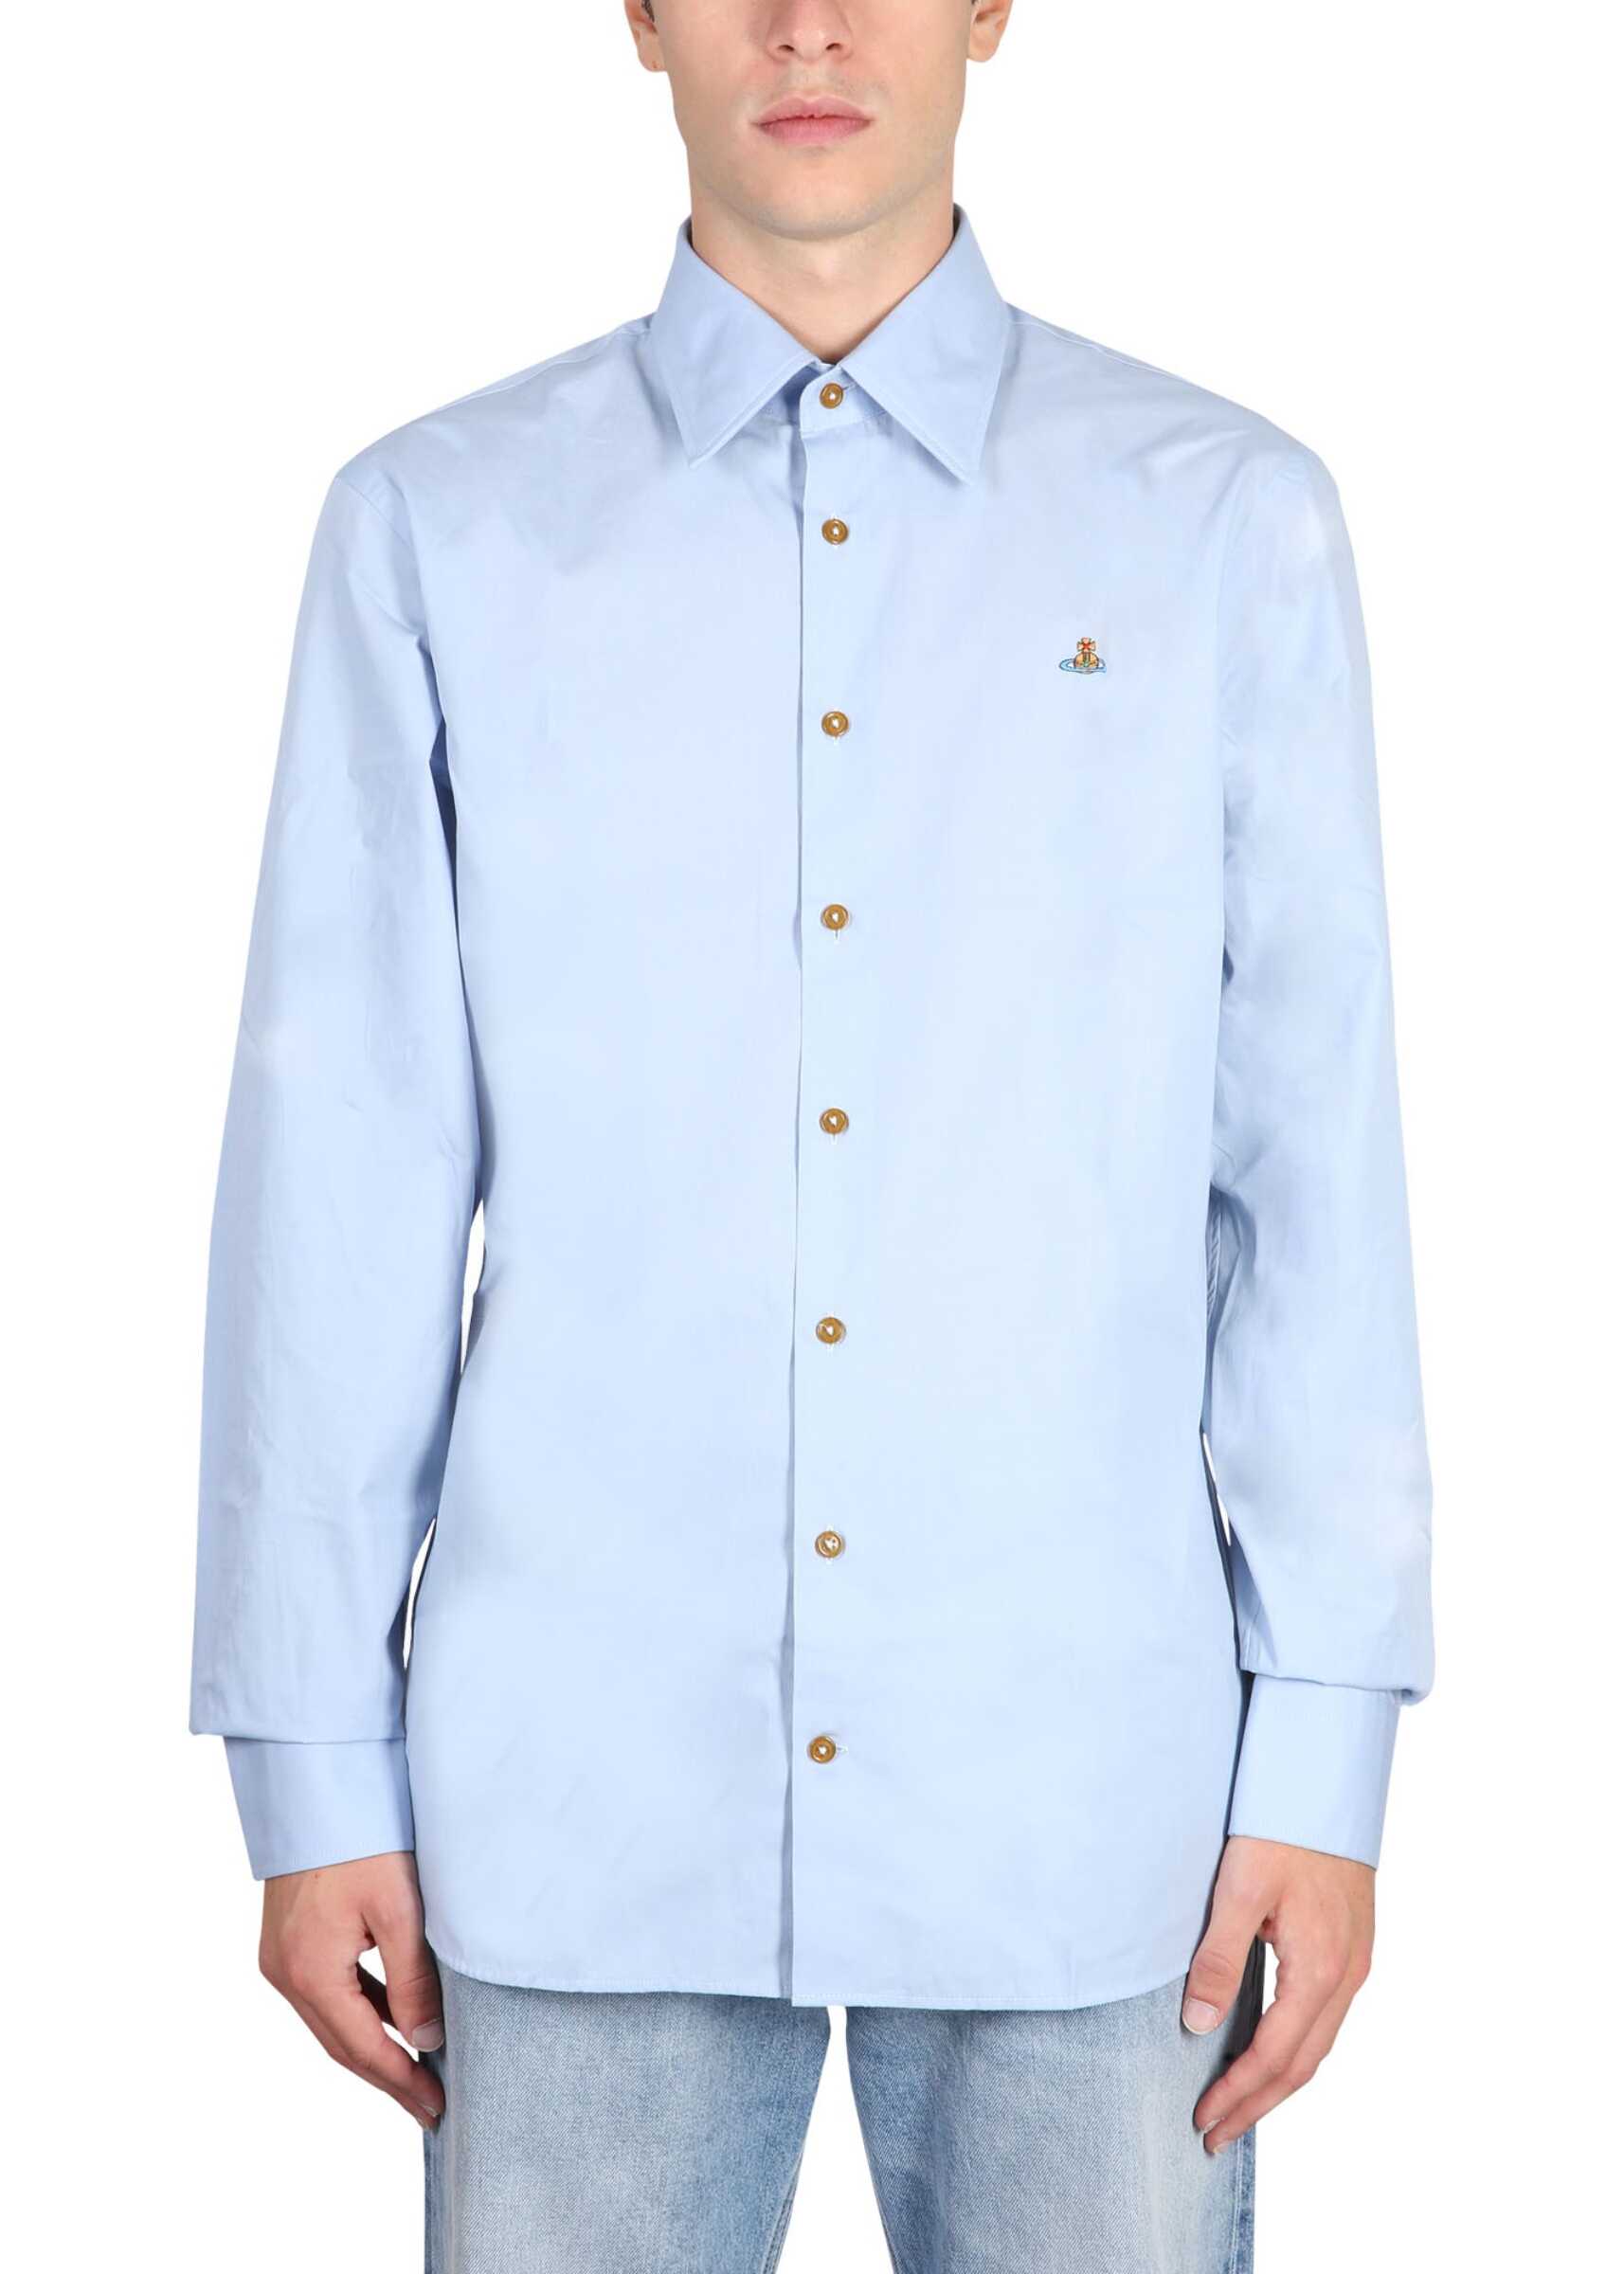 Vivienne Westwood Shirt With Orb Embroidery BABY BLUE